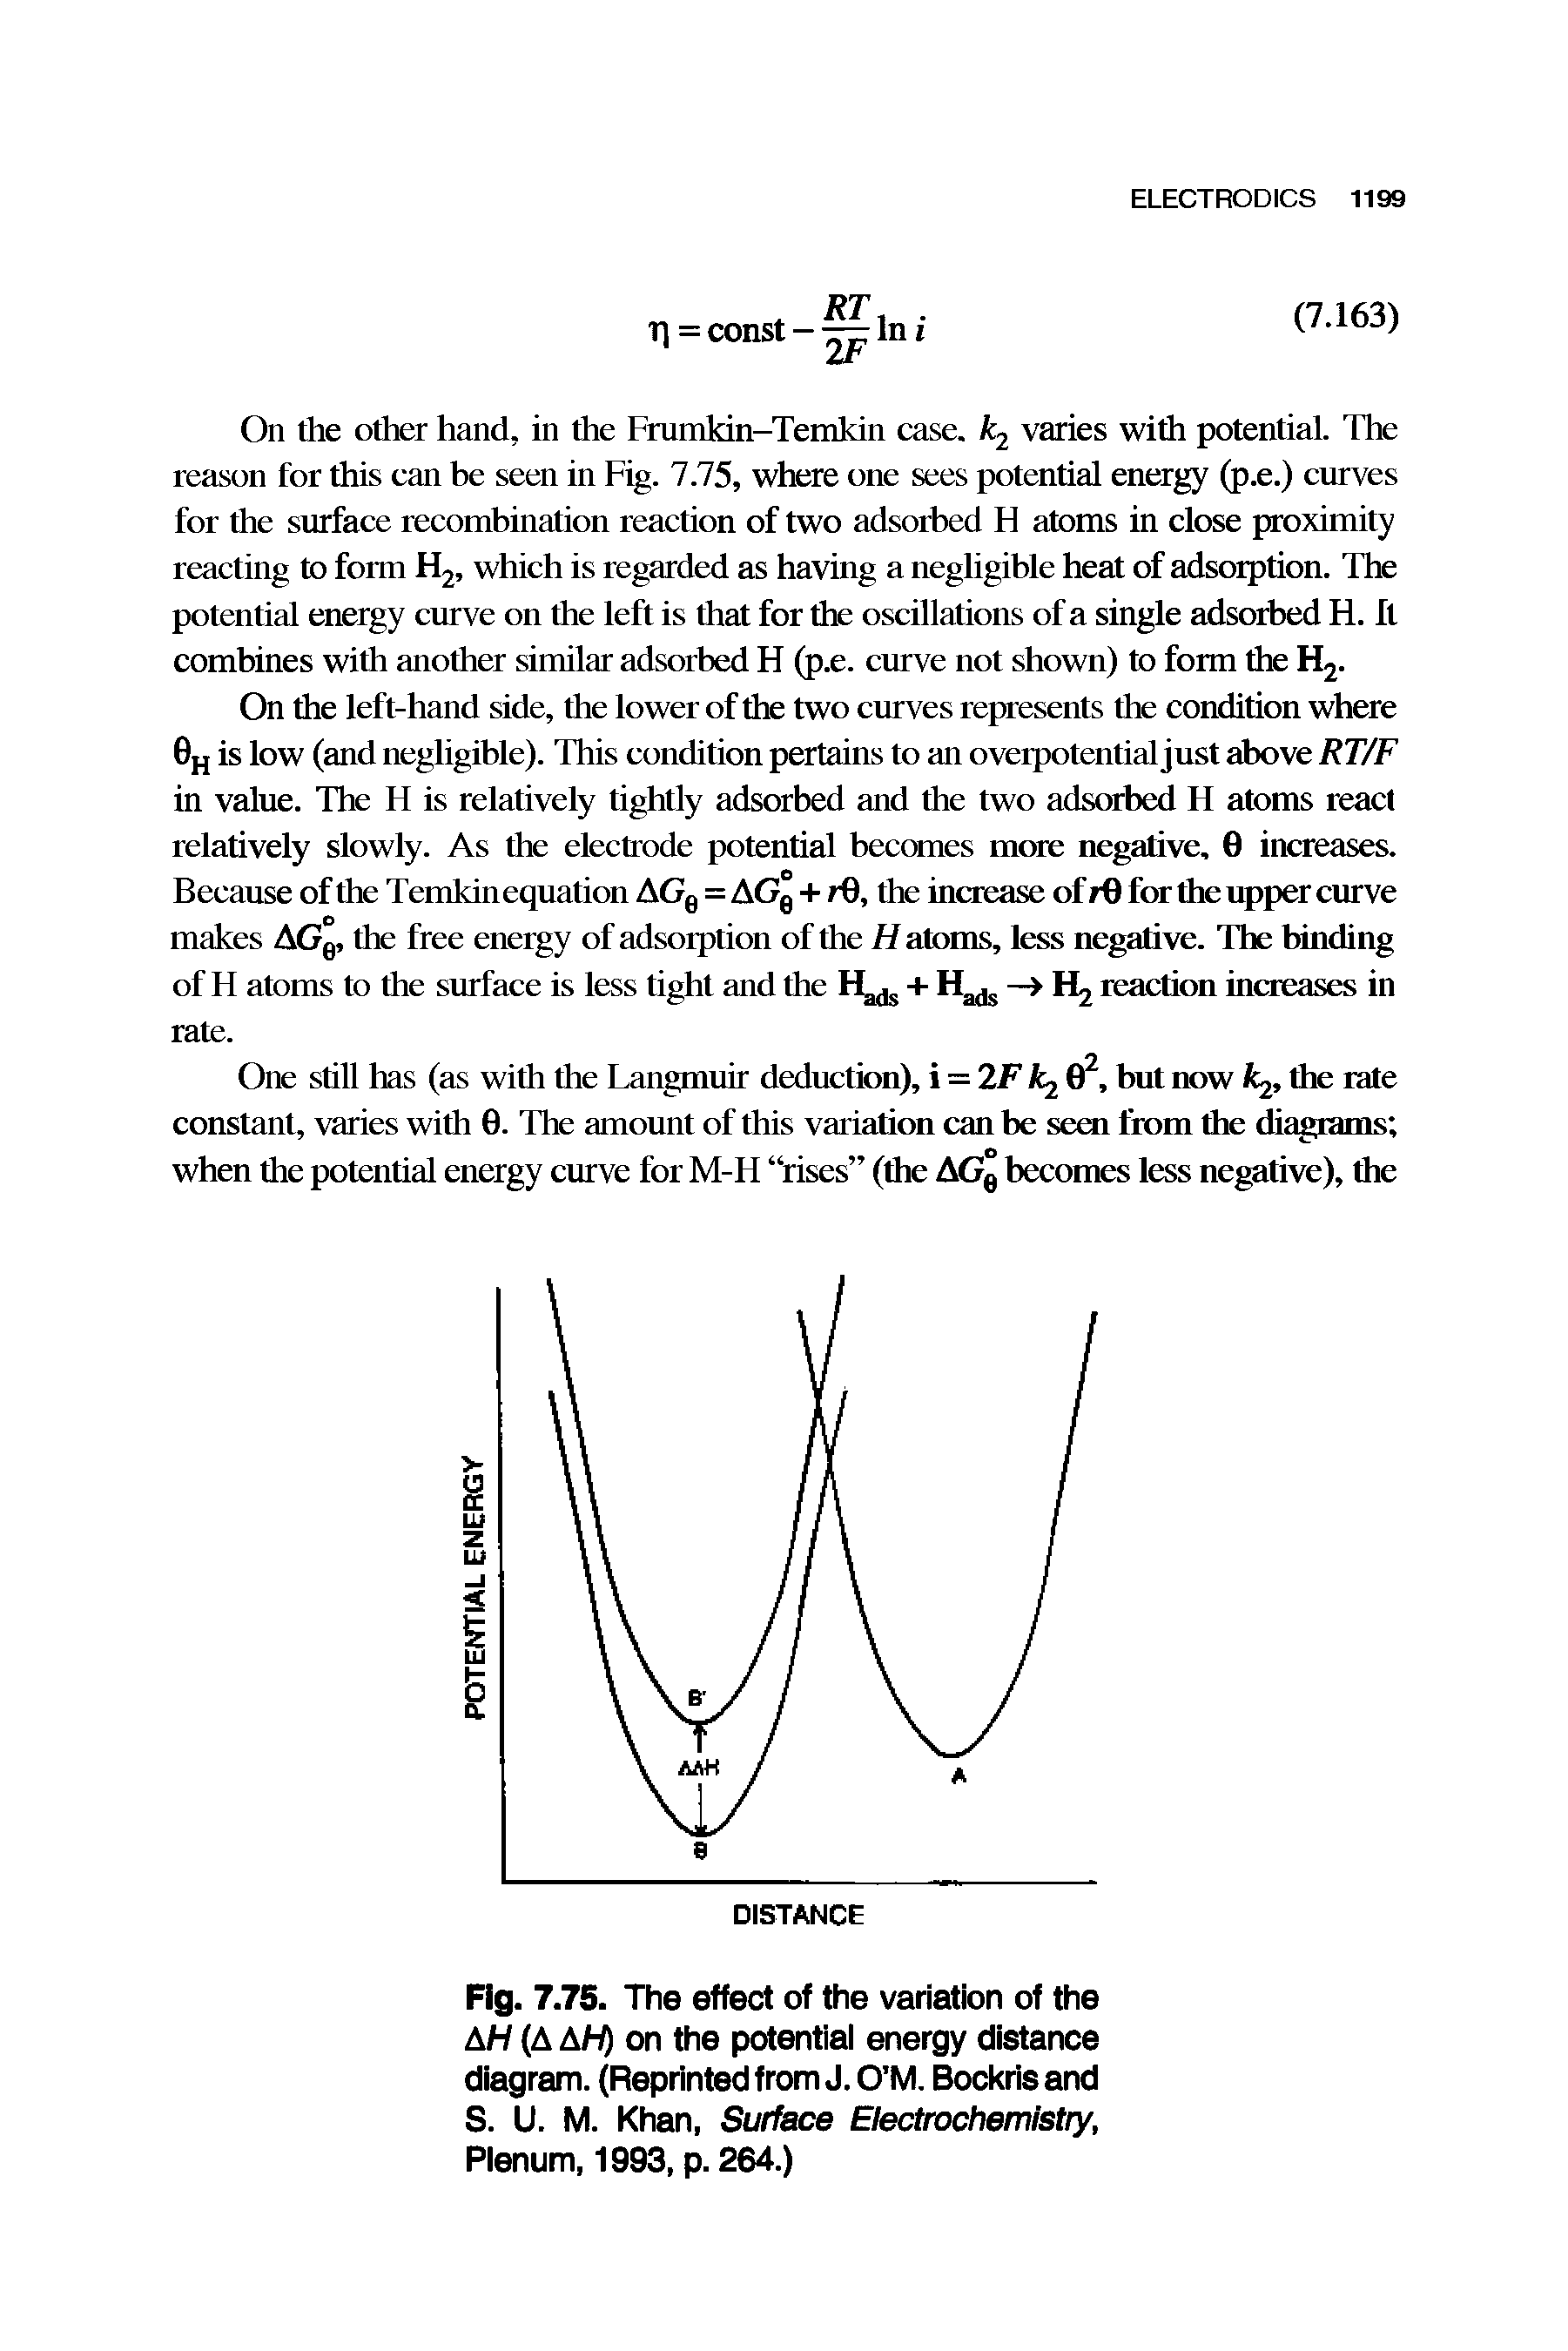 Fig. 7.75. The effect of the variation of the AH (A AH) on the potential energy distance diagram. (Reprinted from J. O M. Bockris and S. U. M. Khan, Surface Electrochemistry, Plenum, 1993, p. 264.)...